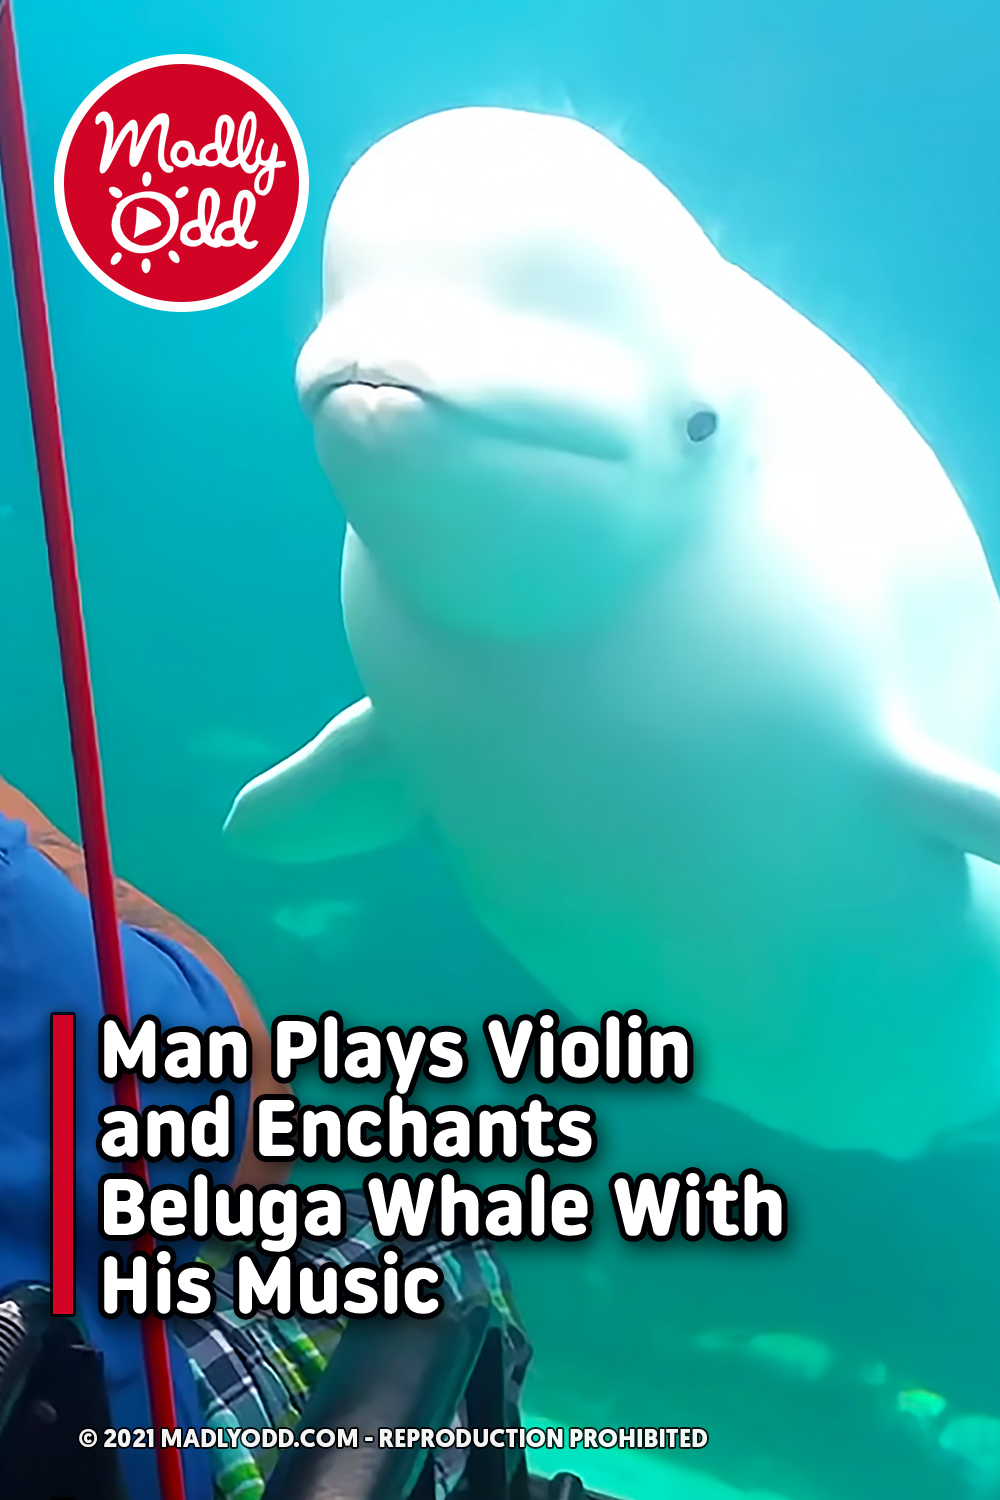 Man Plays Violin and Enchants Beluga Whale With His Music